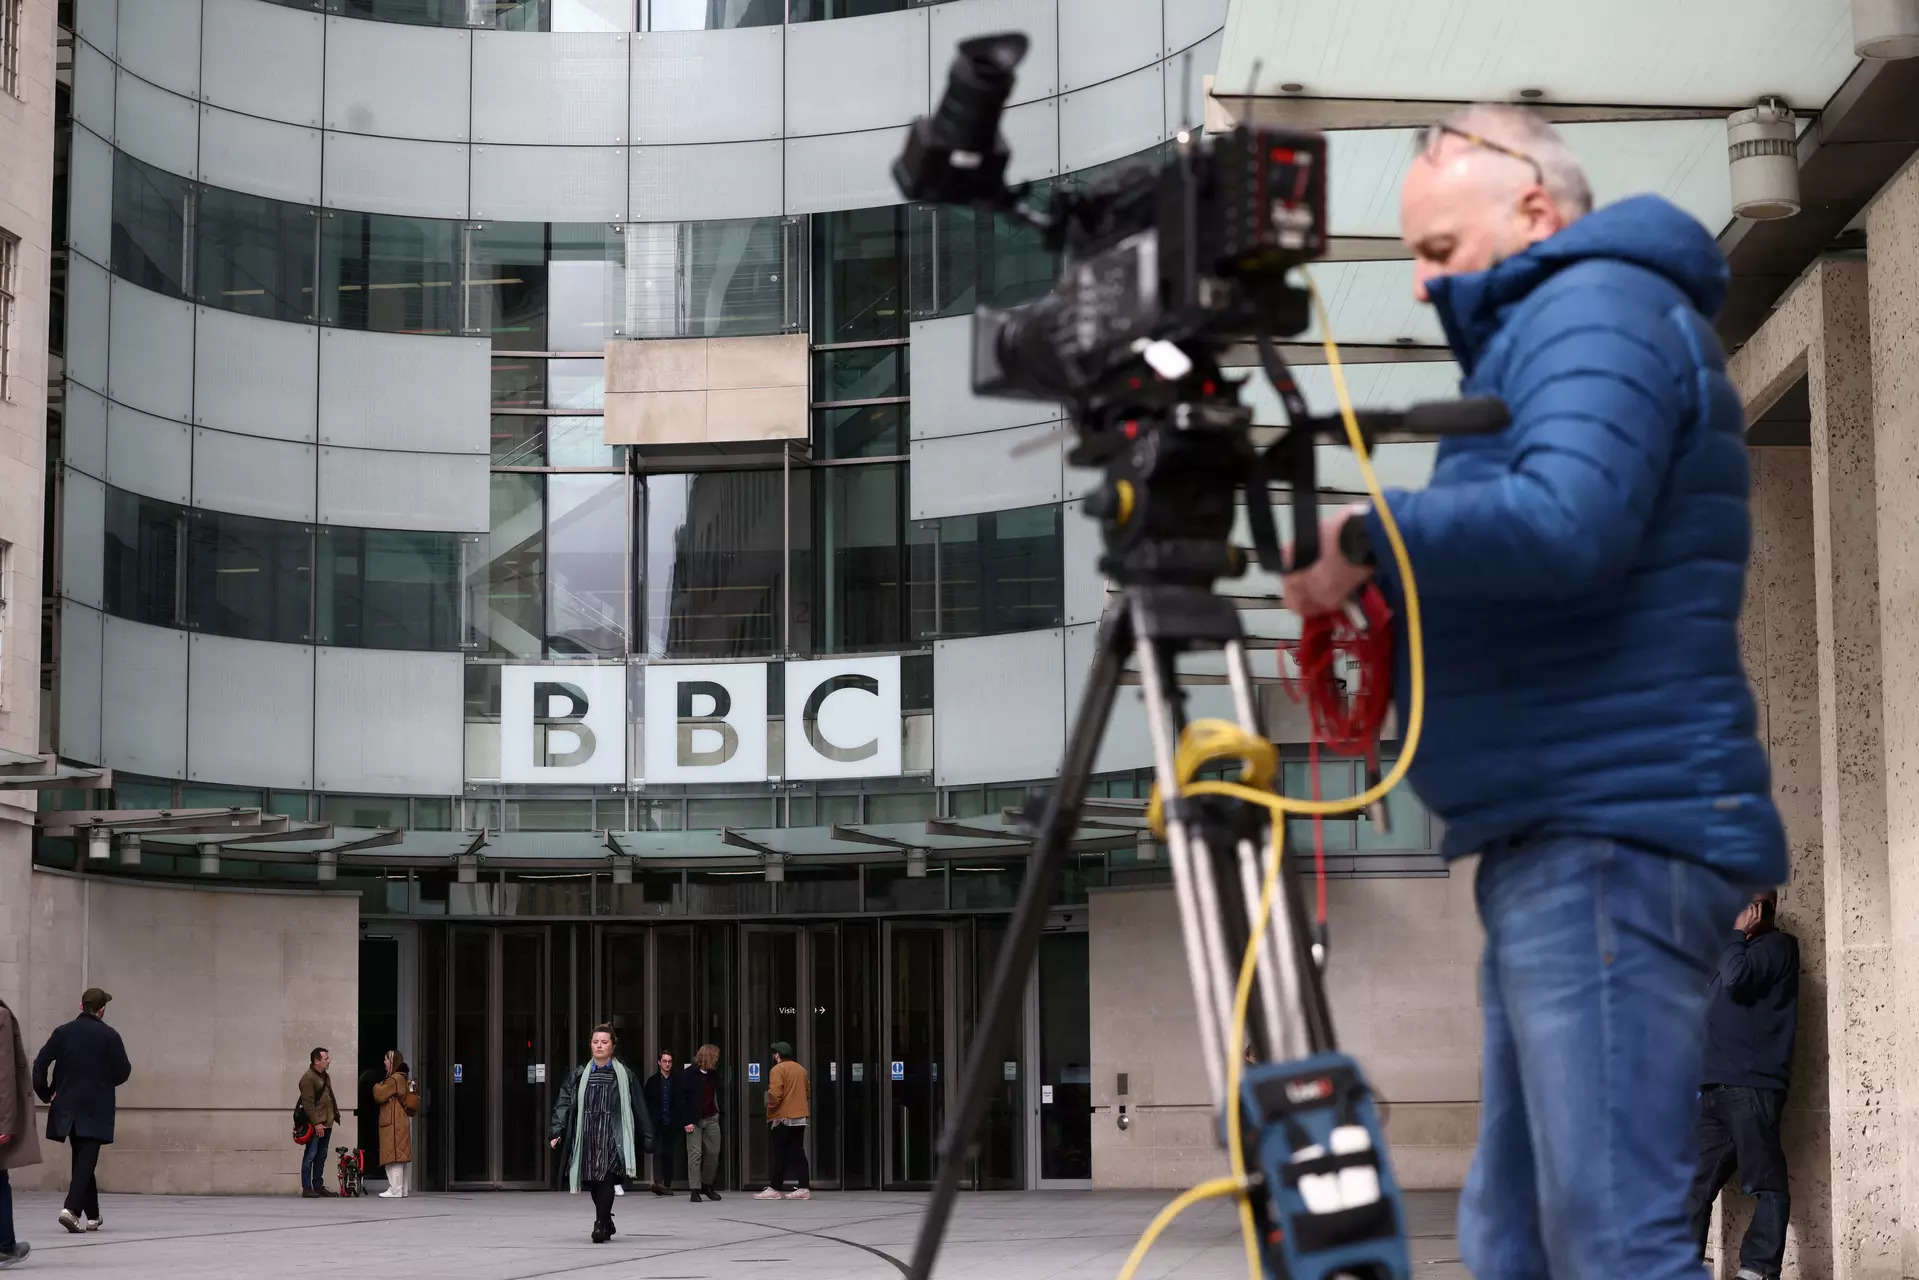 Twitter labels BBC as "government-funded media"